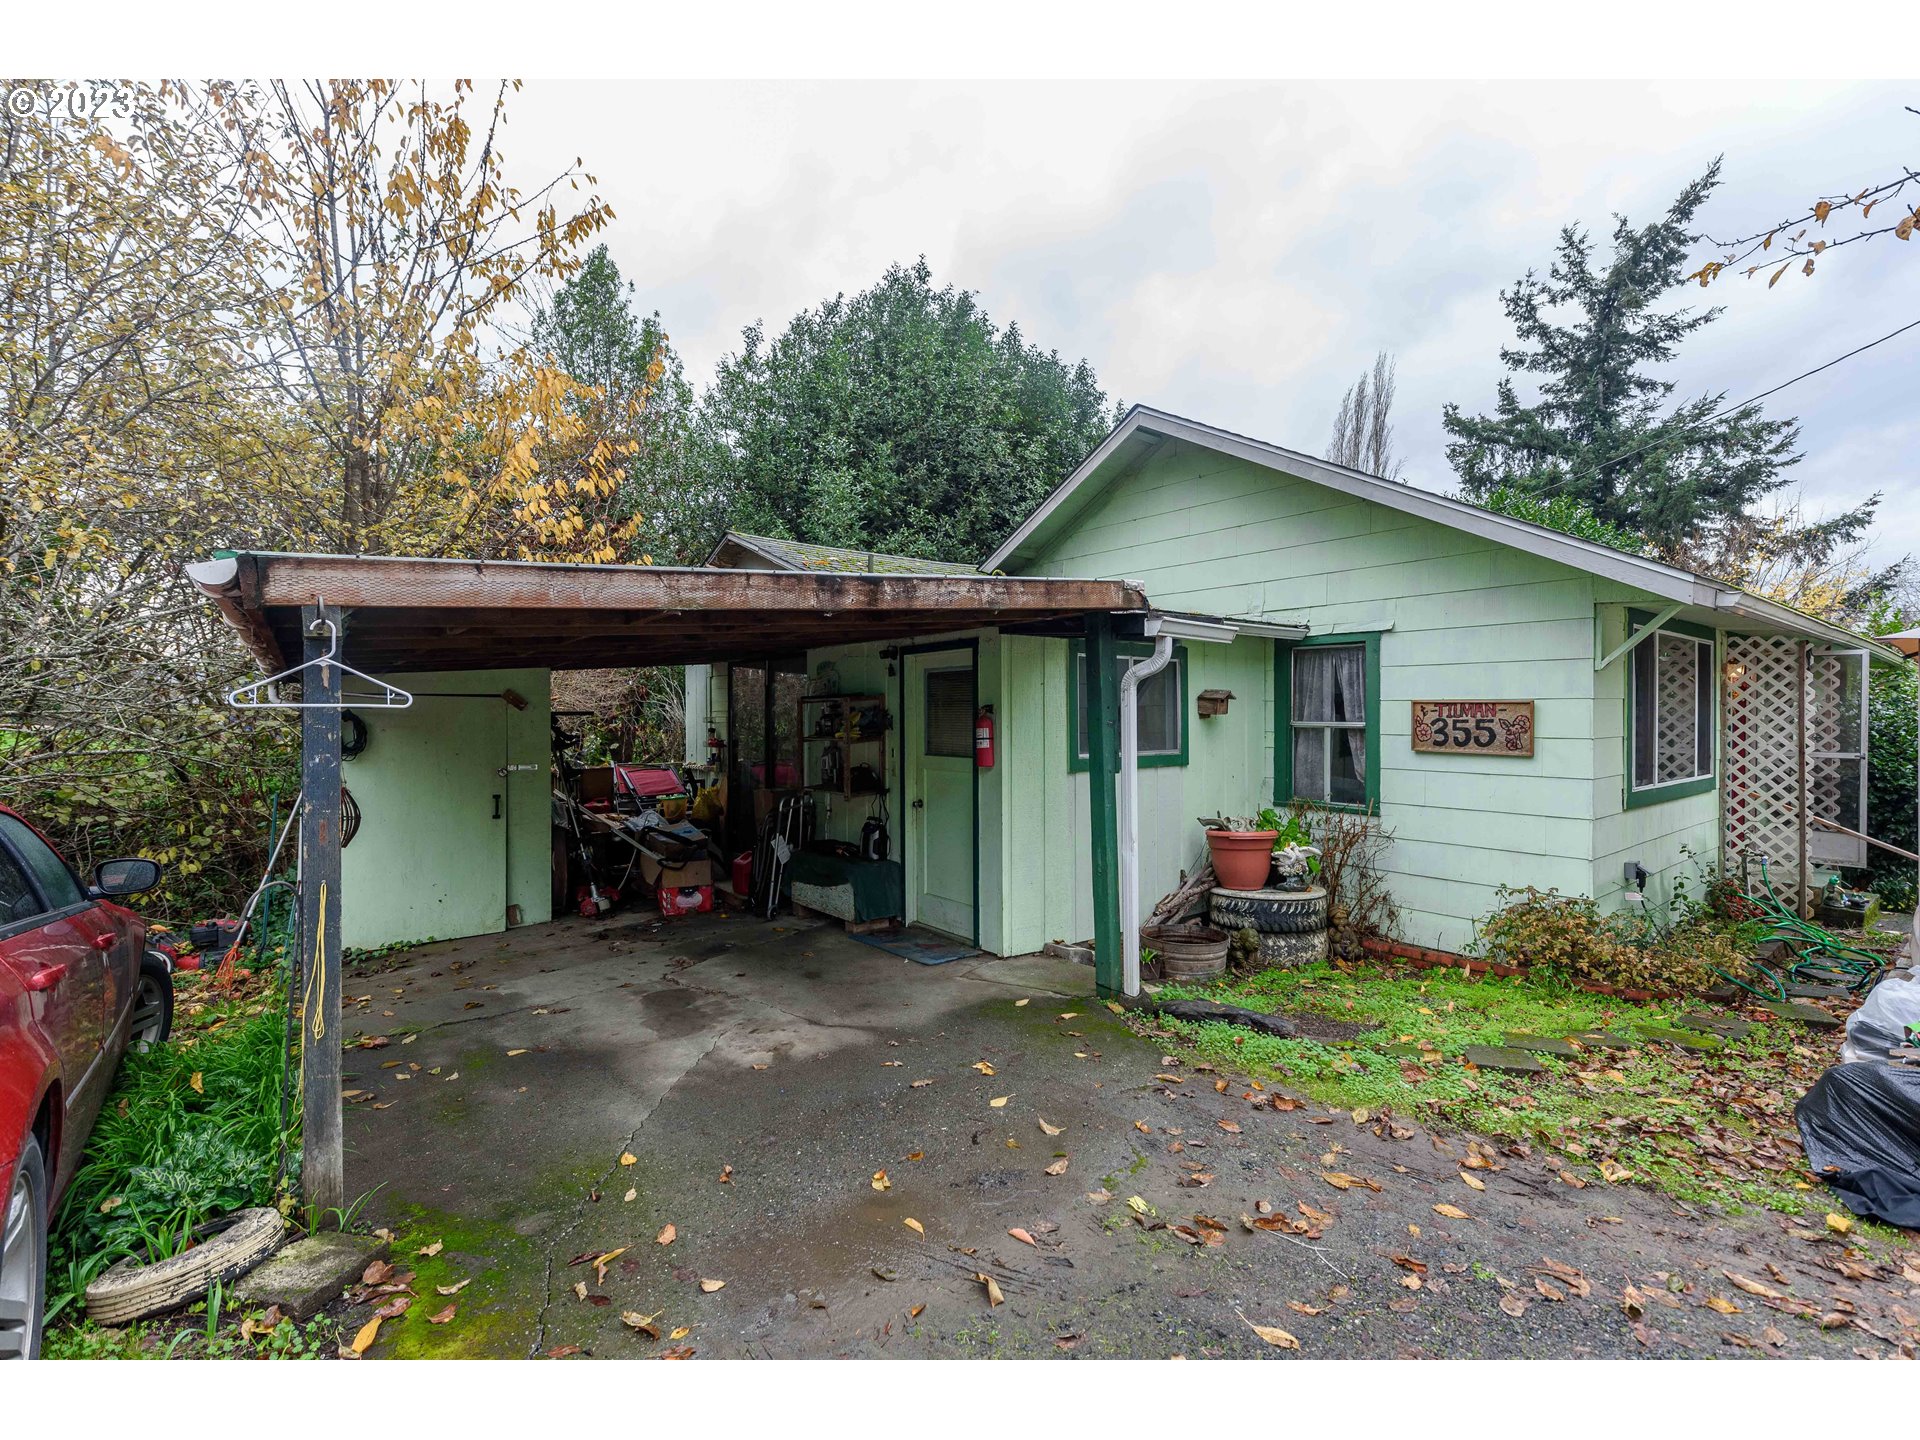 355 S FOLSOM CT, Coquille, OR 